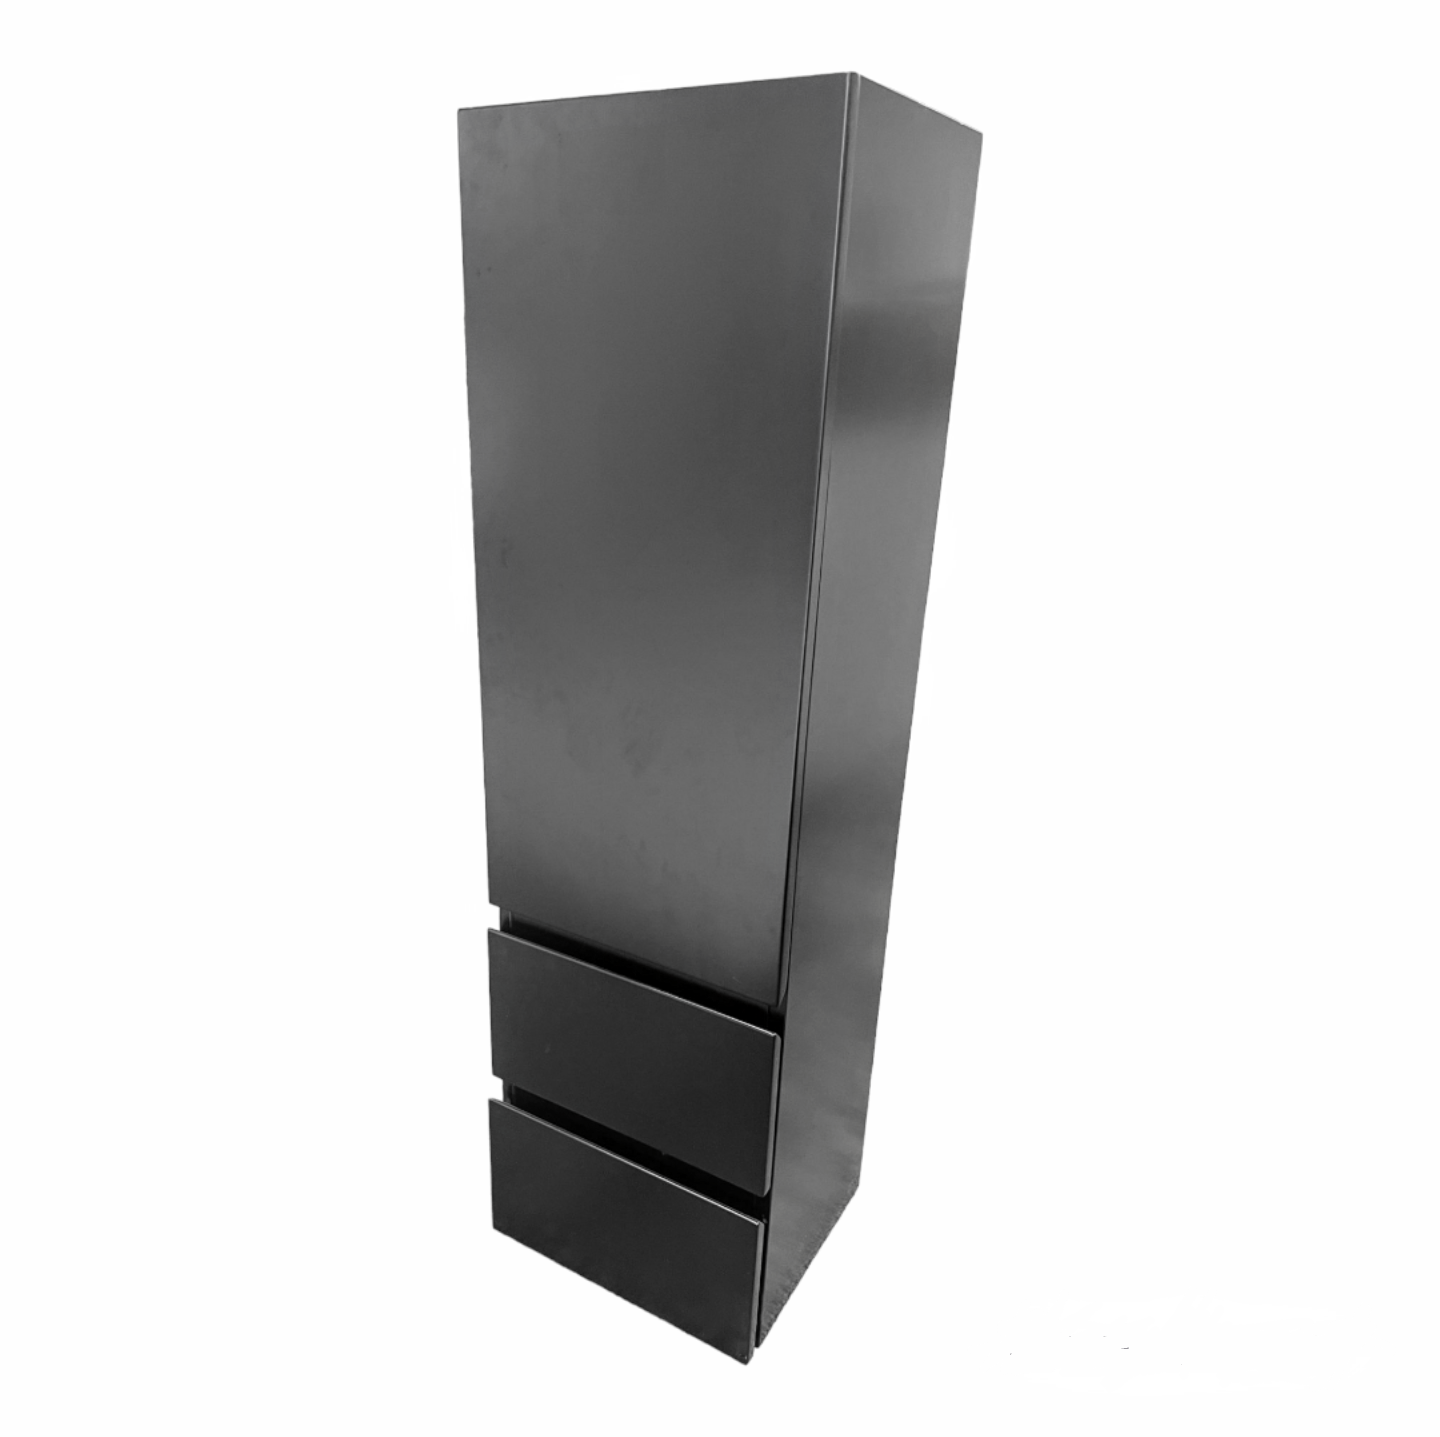 Matte Black Bathroom Tower Side Cabinet with 2 drawers 330w x 315d x 1200h mm